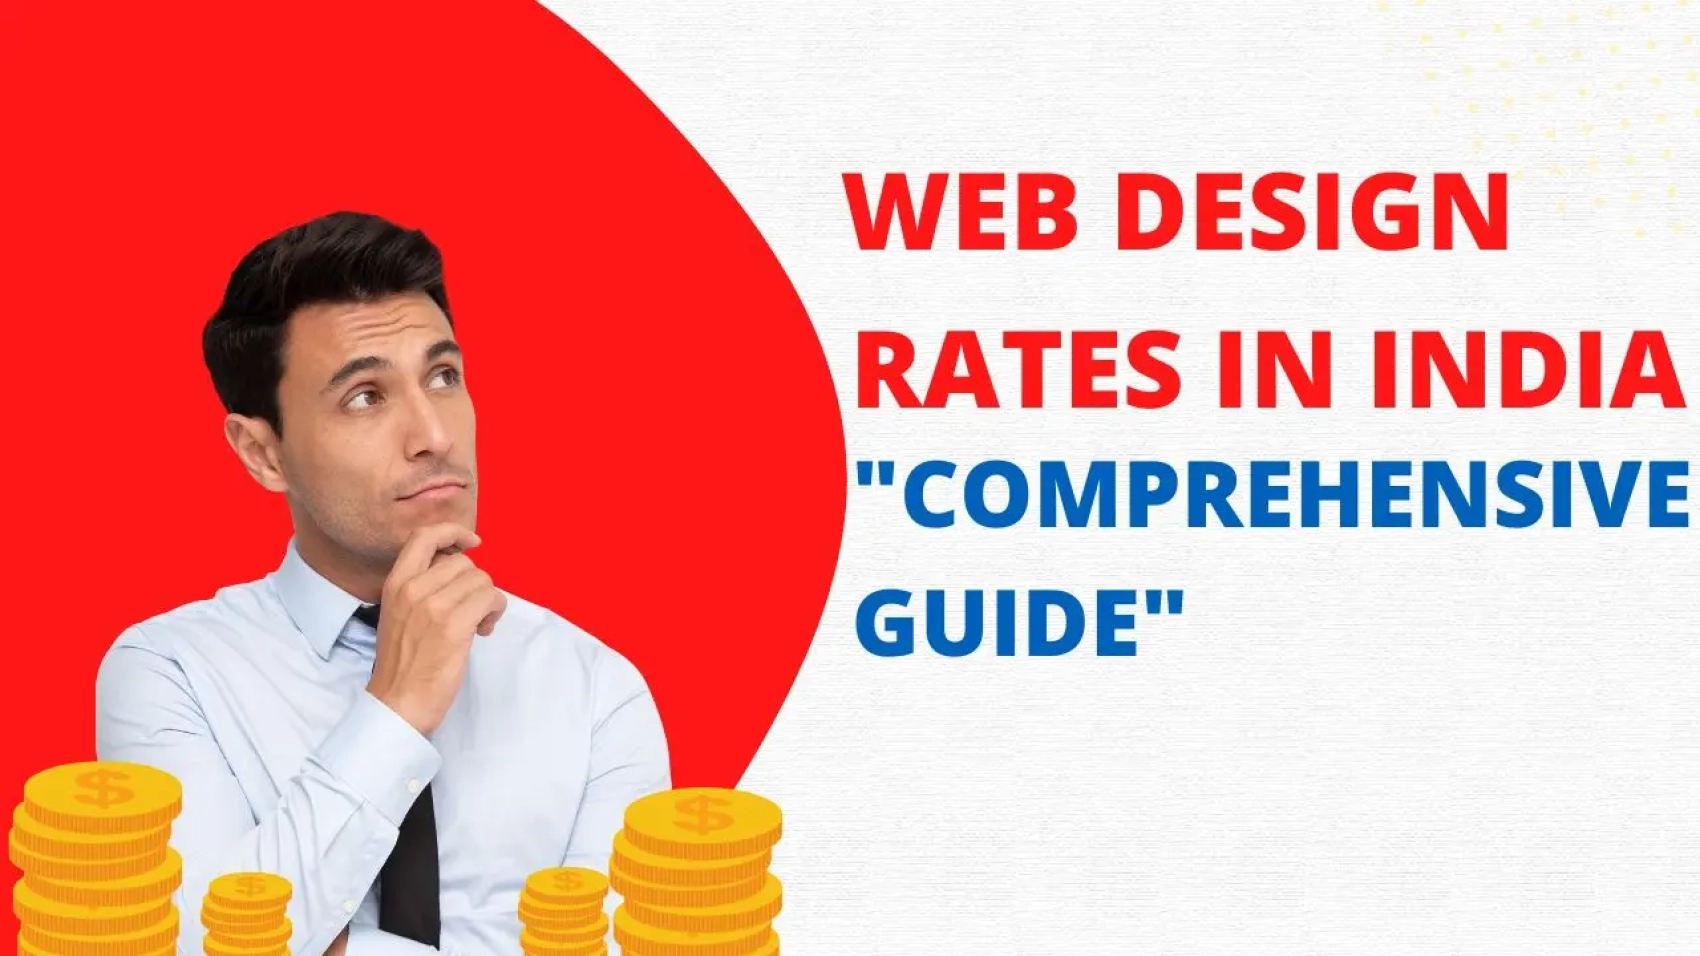 Web Design Rates in India: A Comprehensive Guide